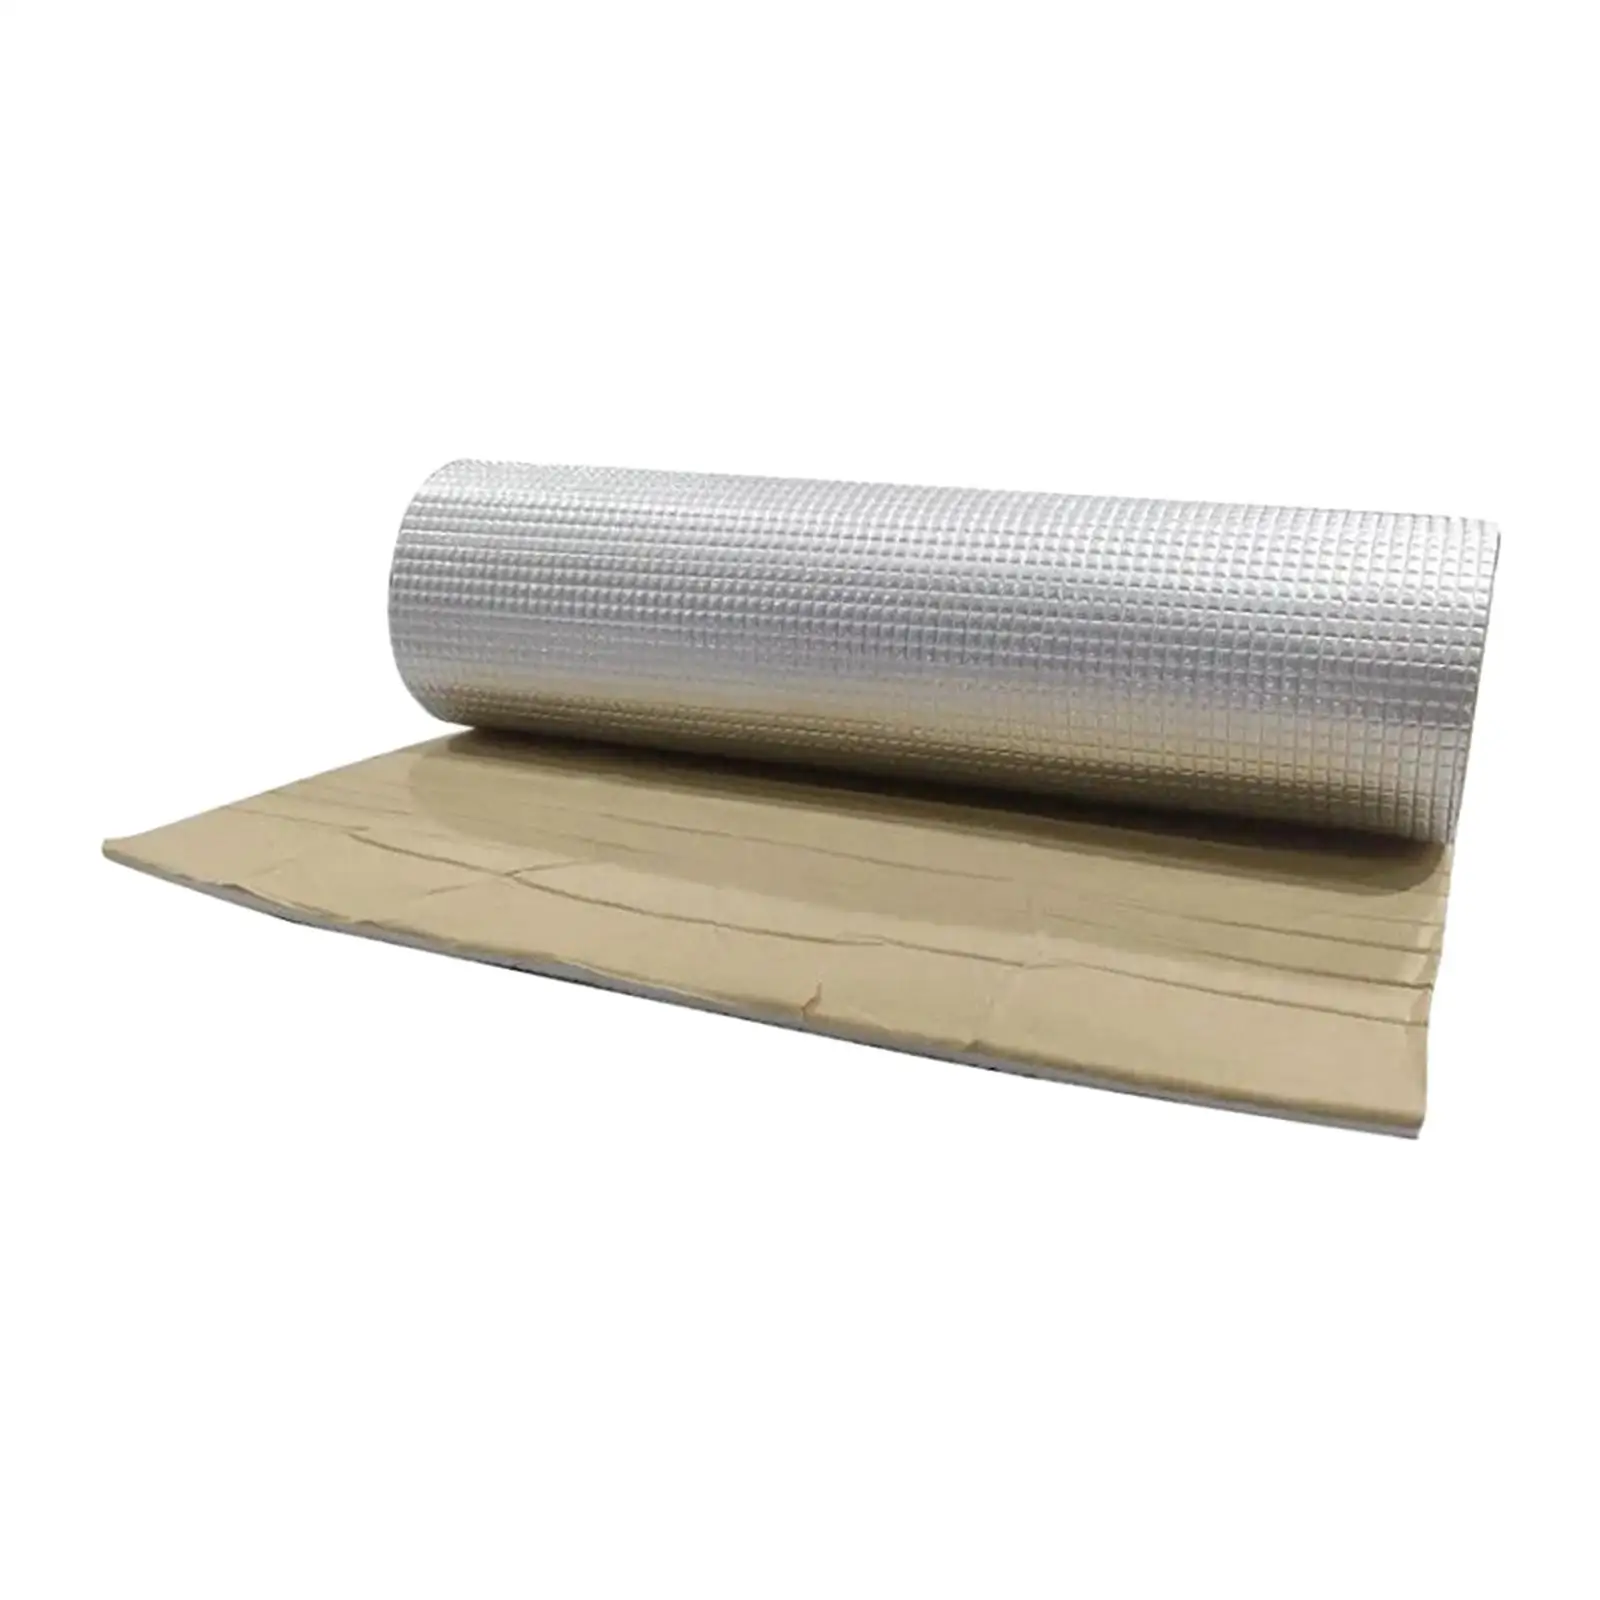 Audio Noise Insulation and Dampening Replacement Heat Shield Sound Deadener